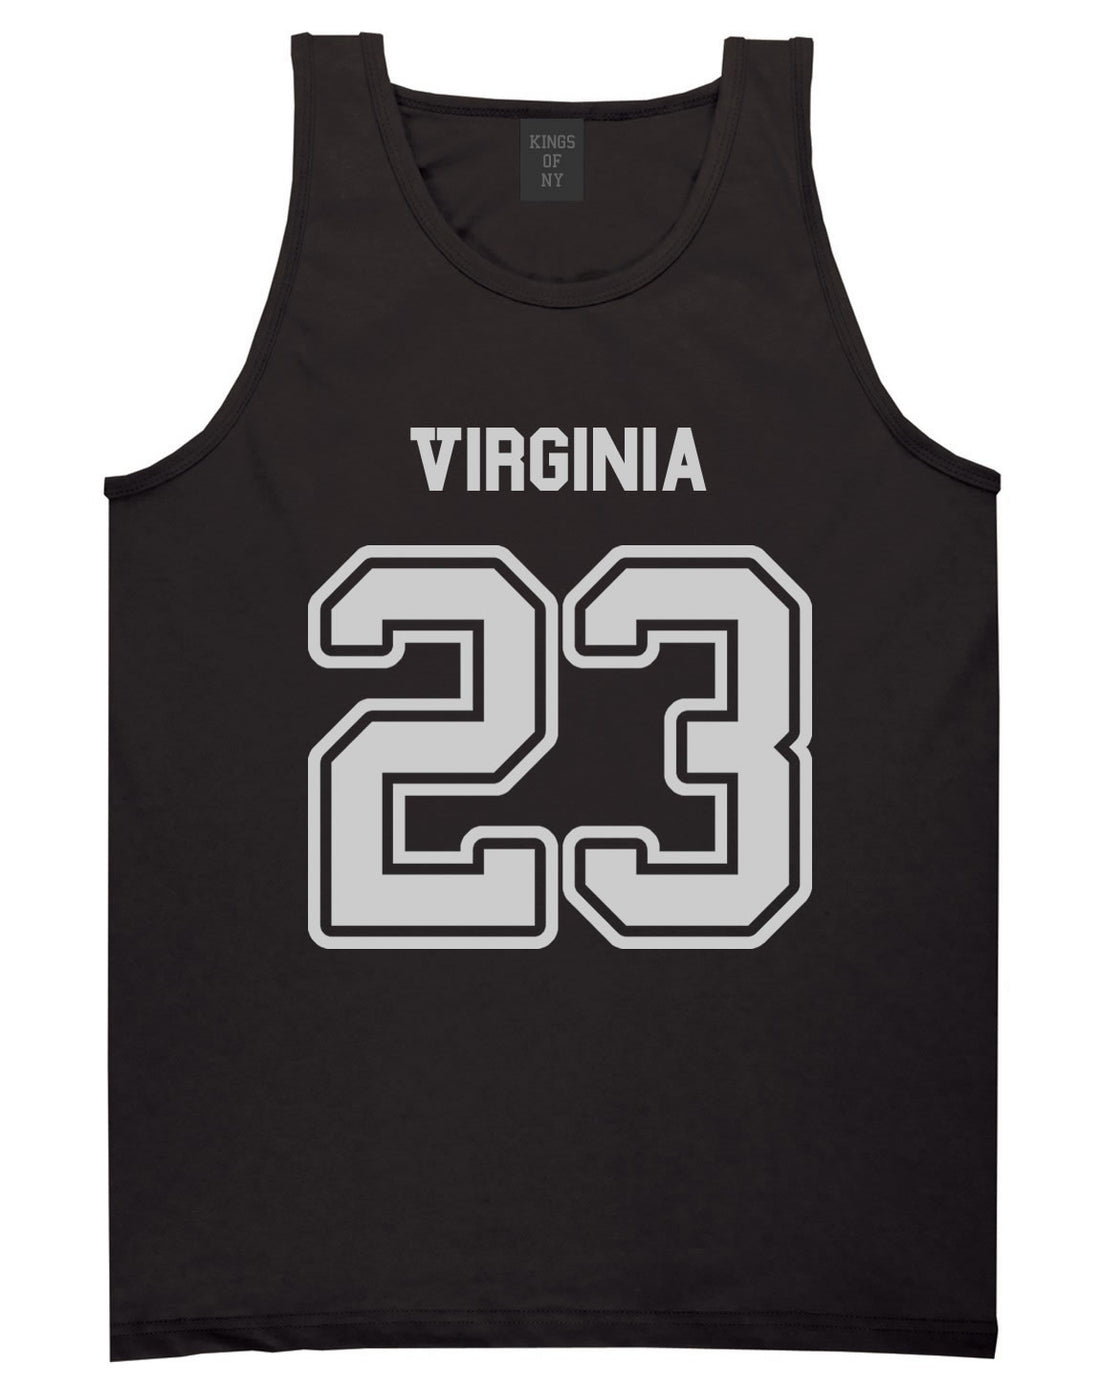 Sport Style Virginia 23 Team State Jersey Mens Tank Top By Kings Of NY